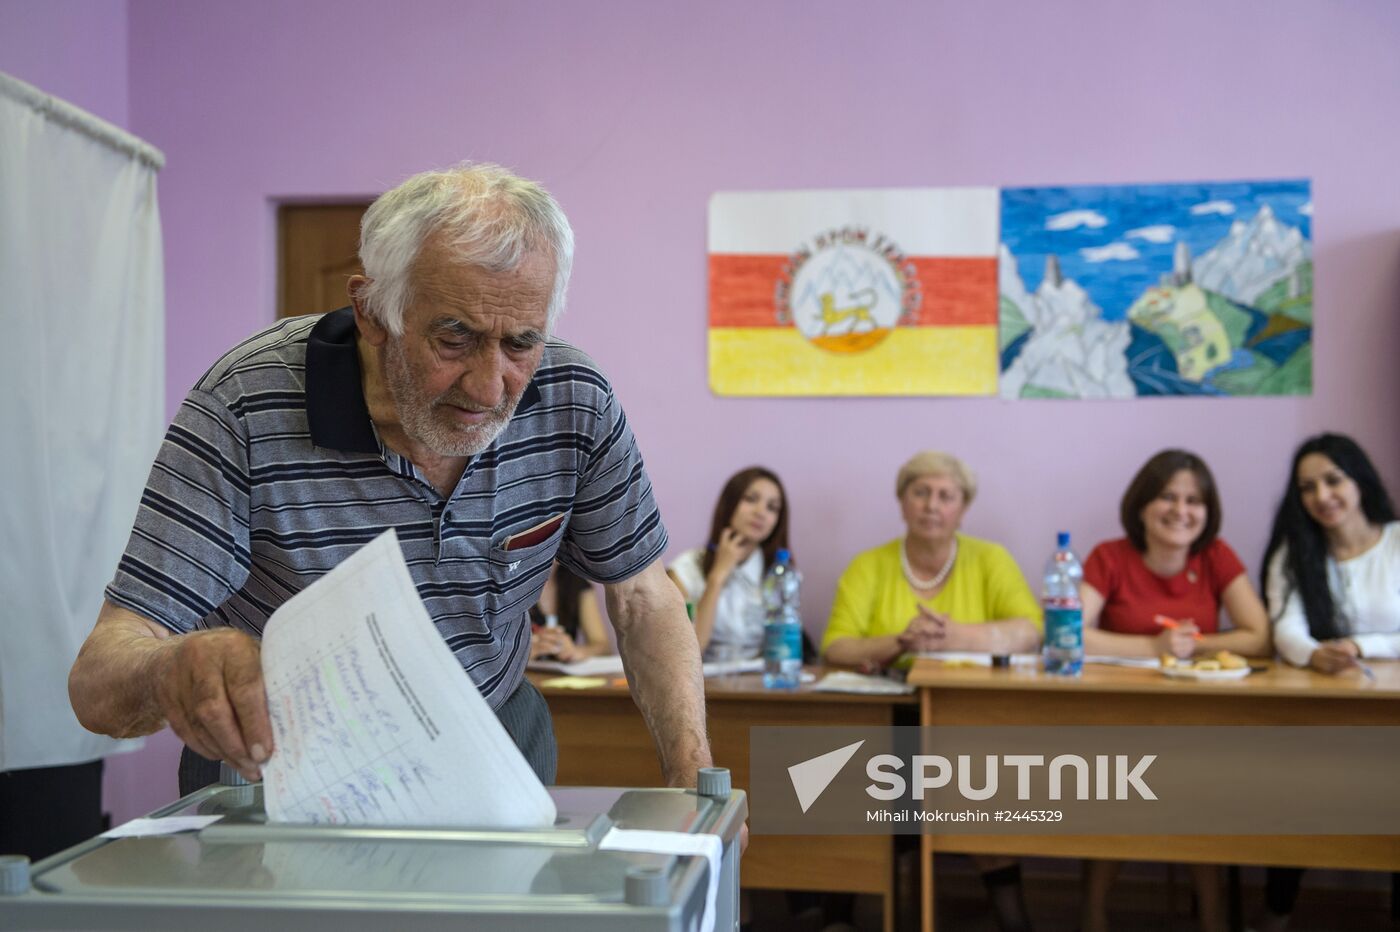 Parliamentary elections in South Ossetia